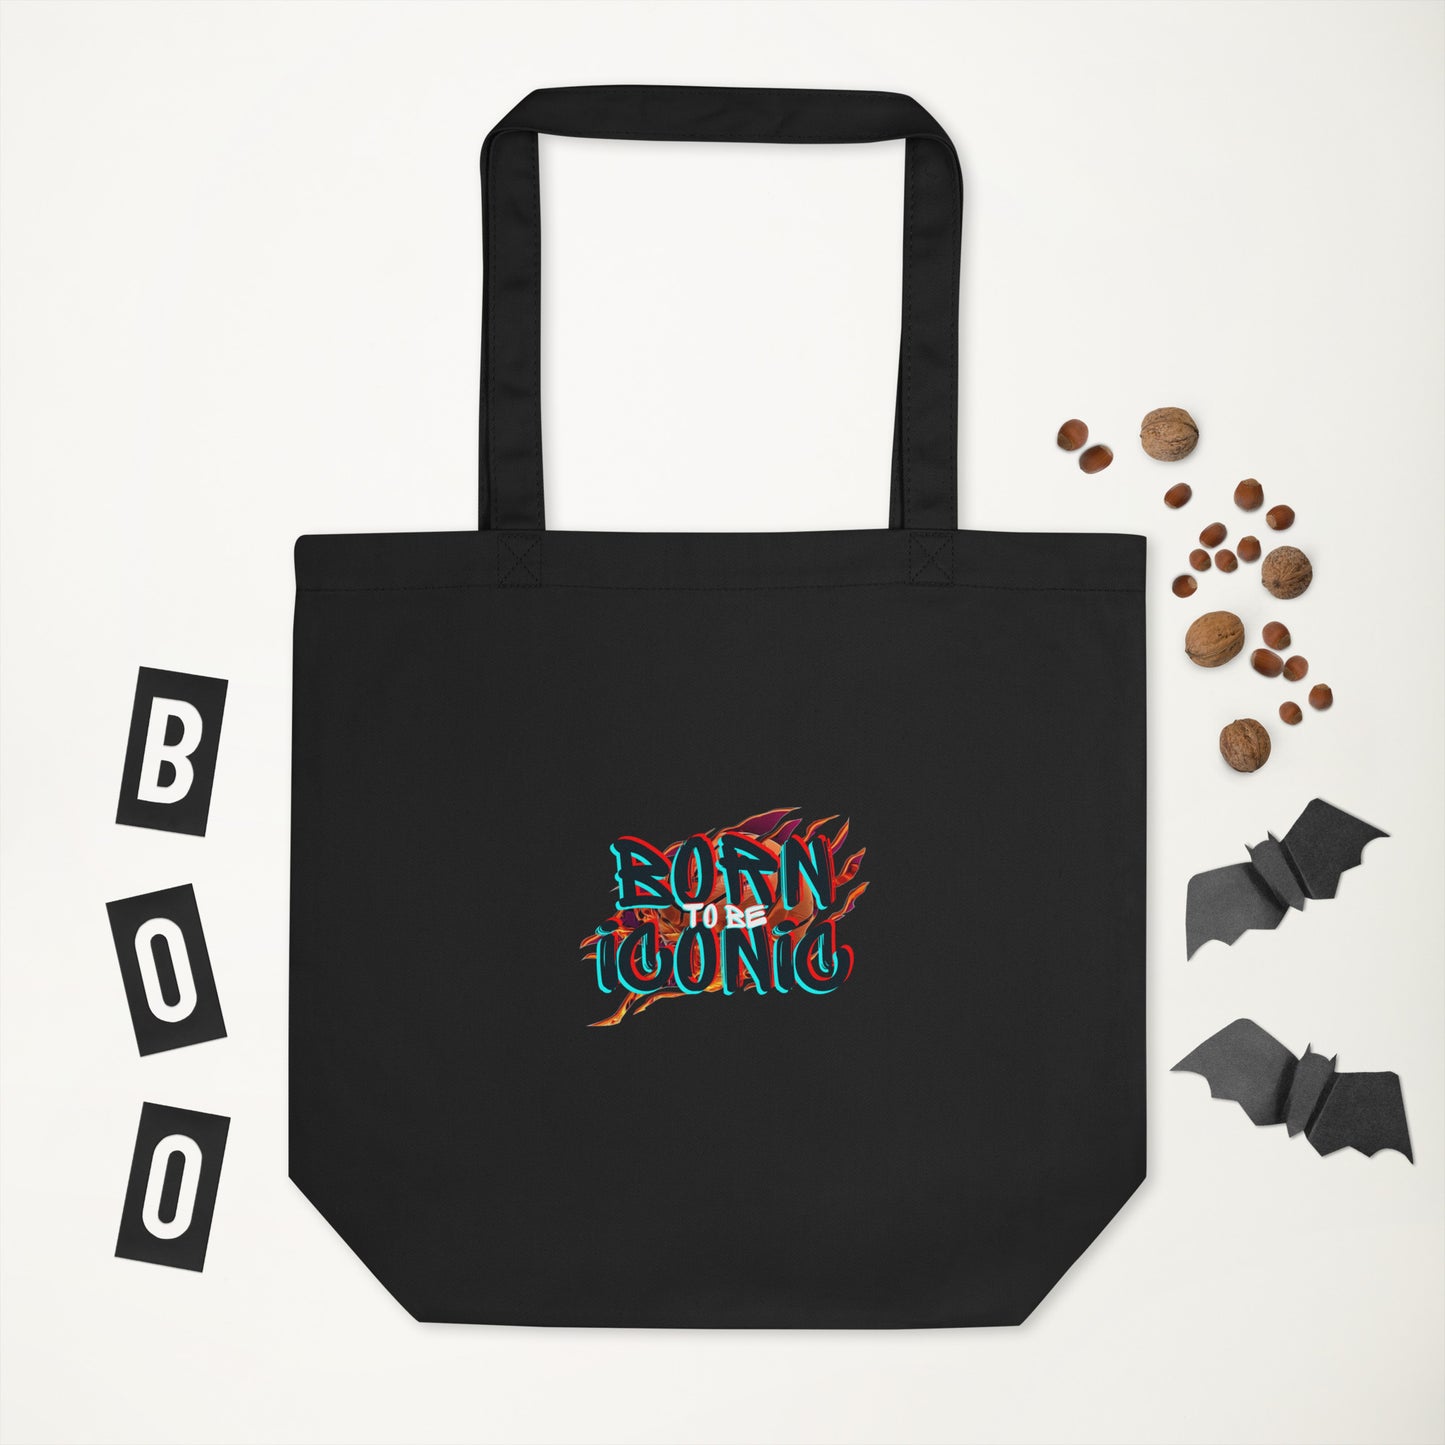 Born to Be ICONIC Eco Tote Bag